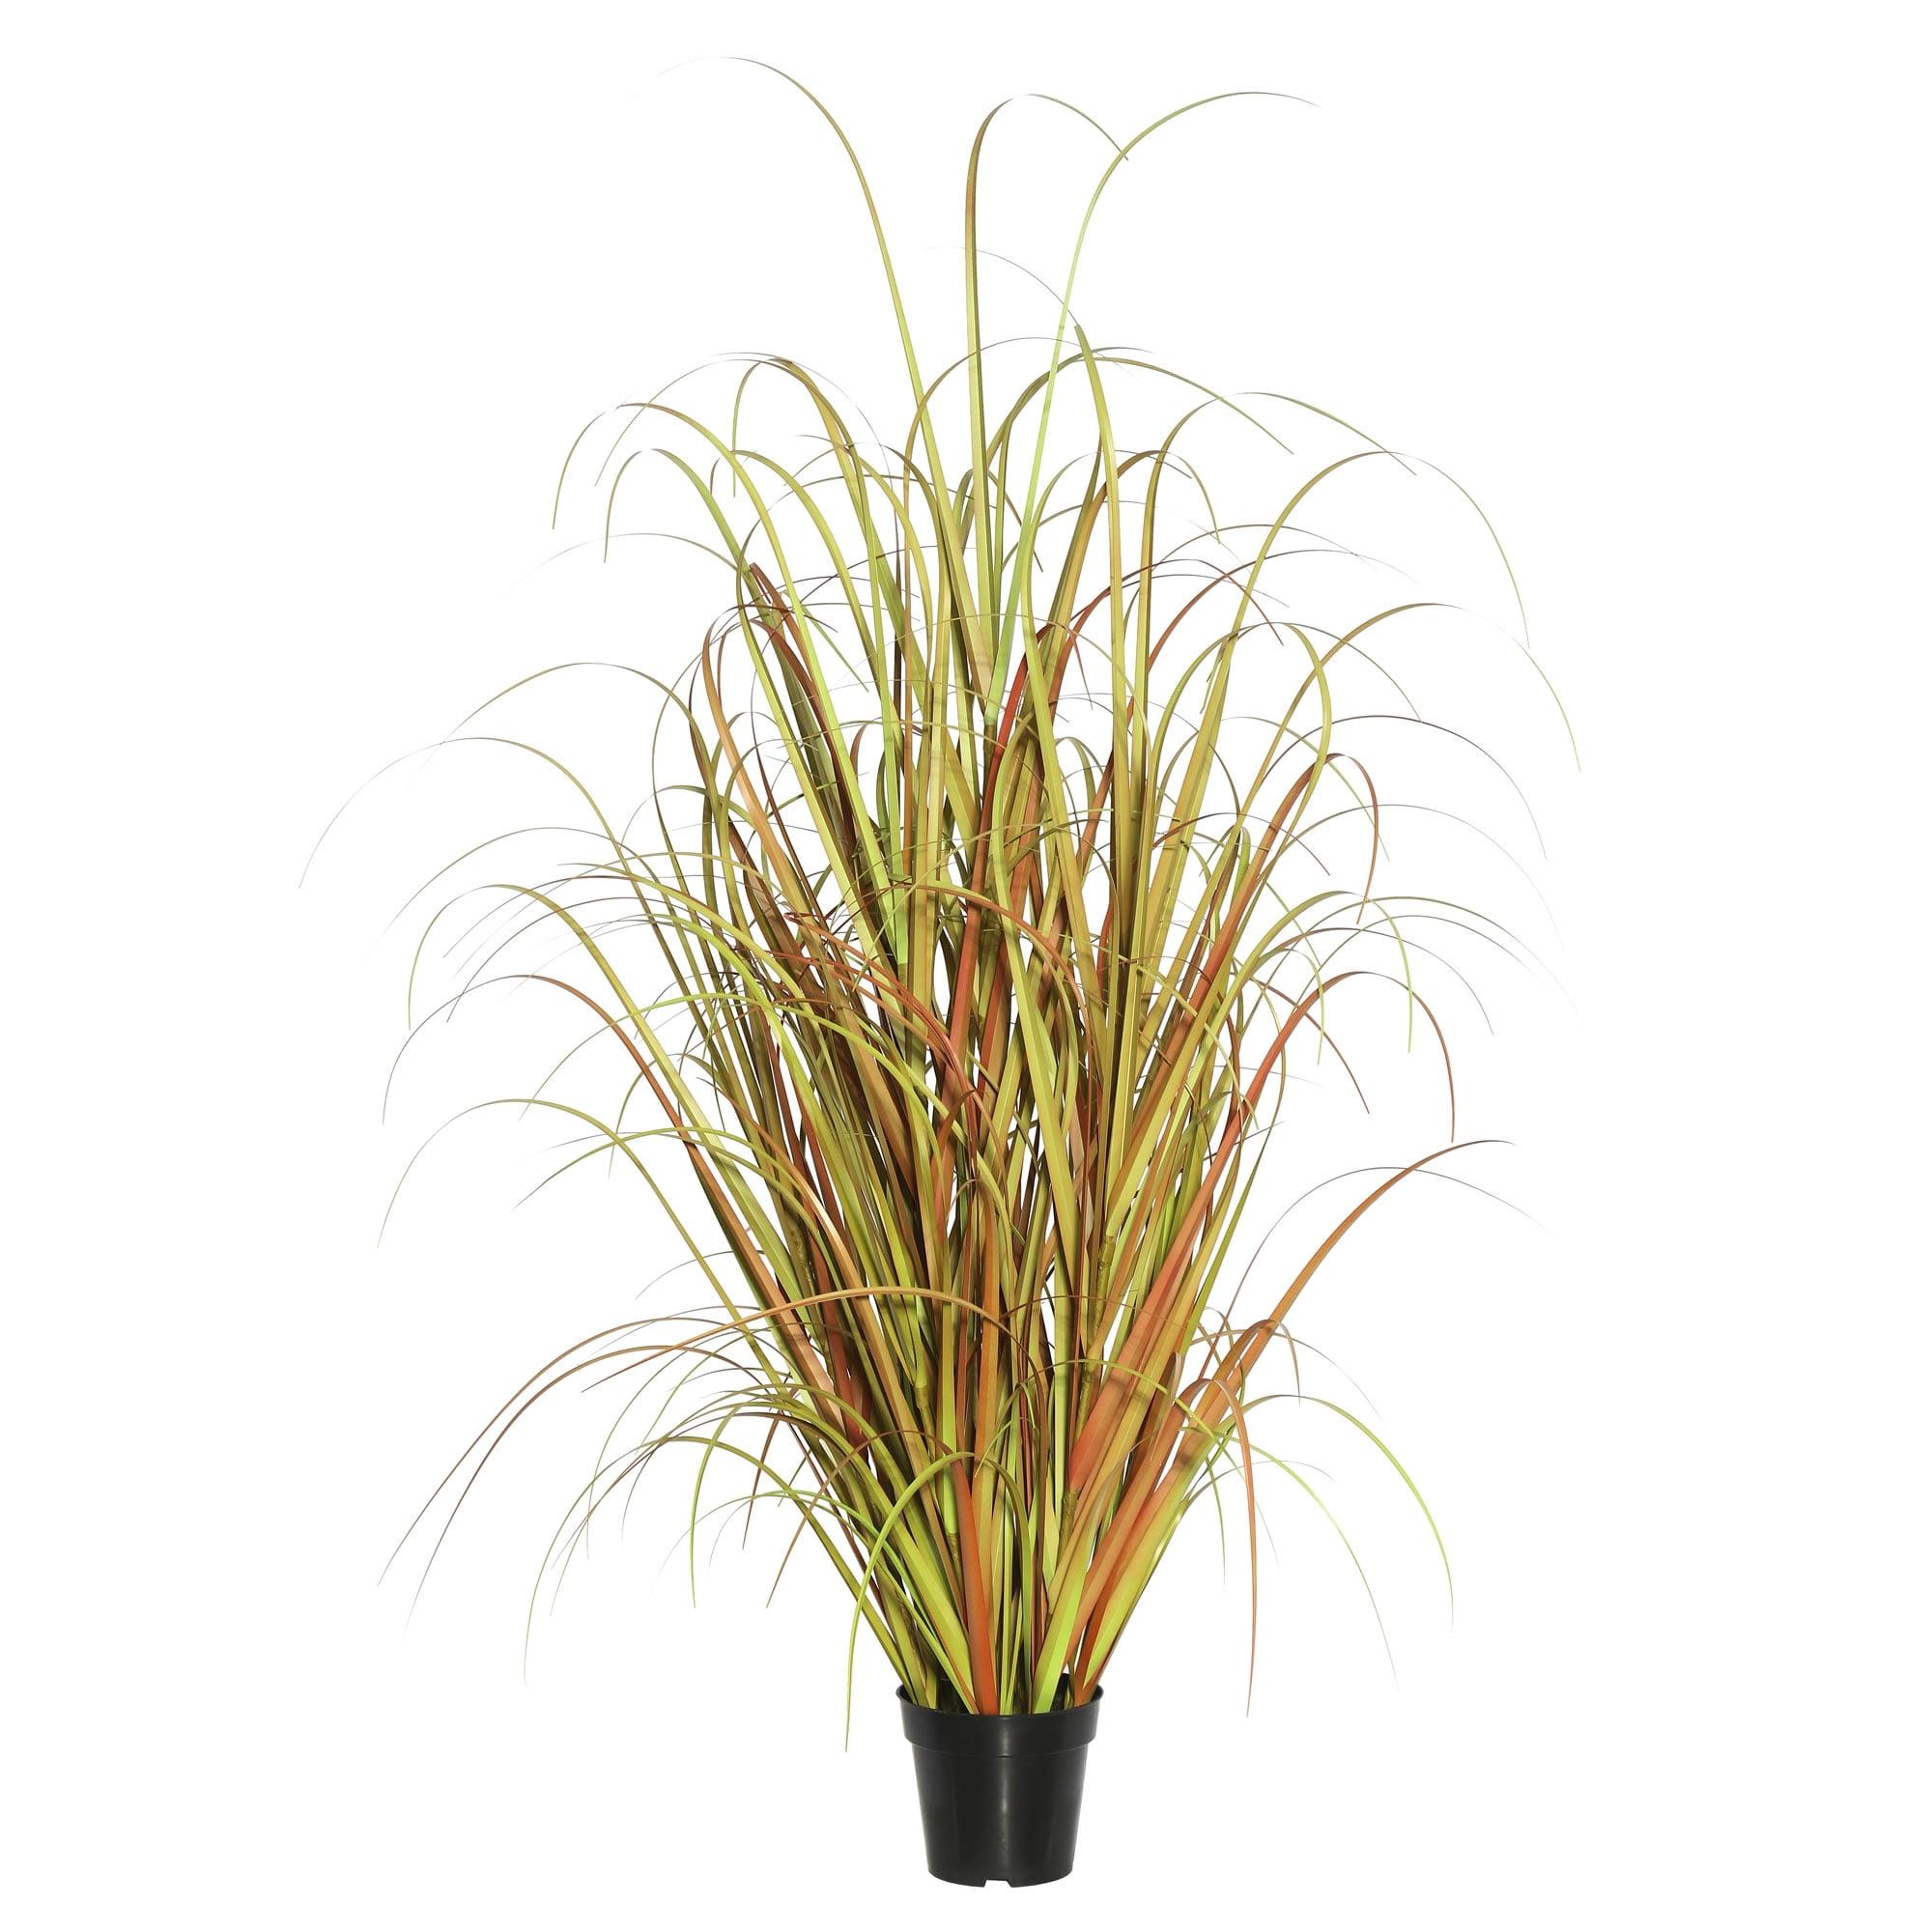 Lifelike Mixed Brown Grass Potted Outdoor Decor with Lights, 50"